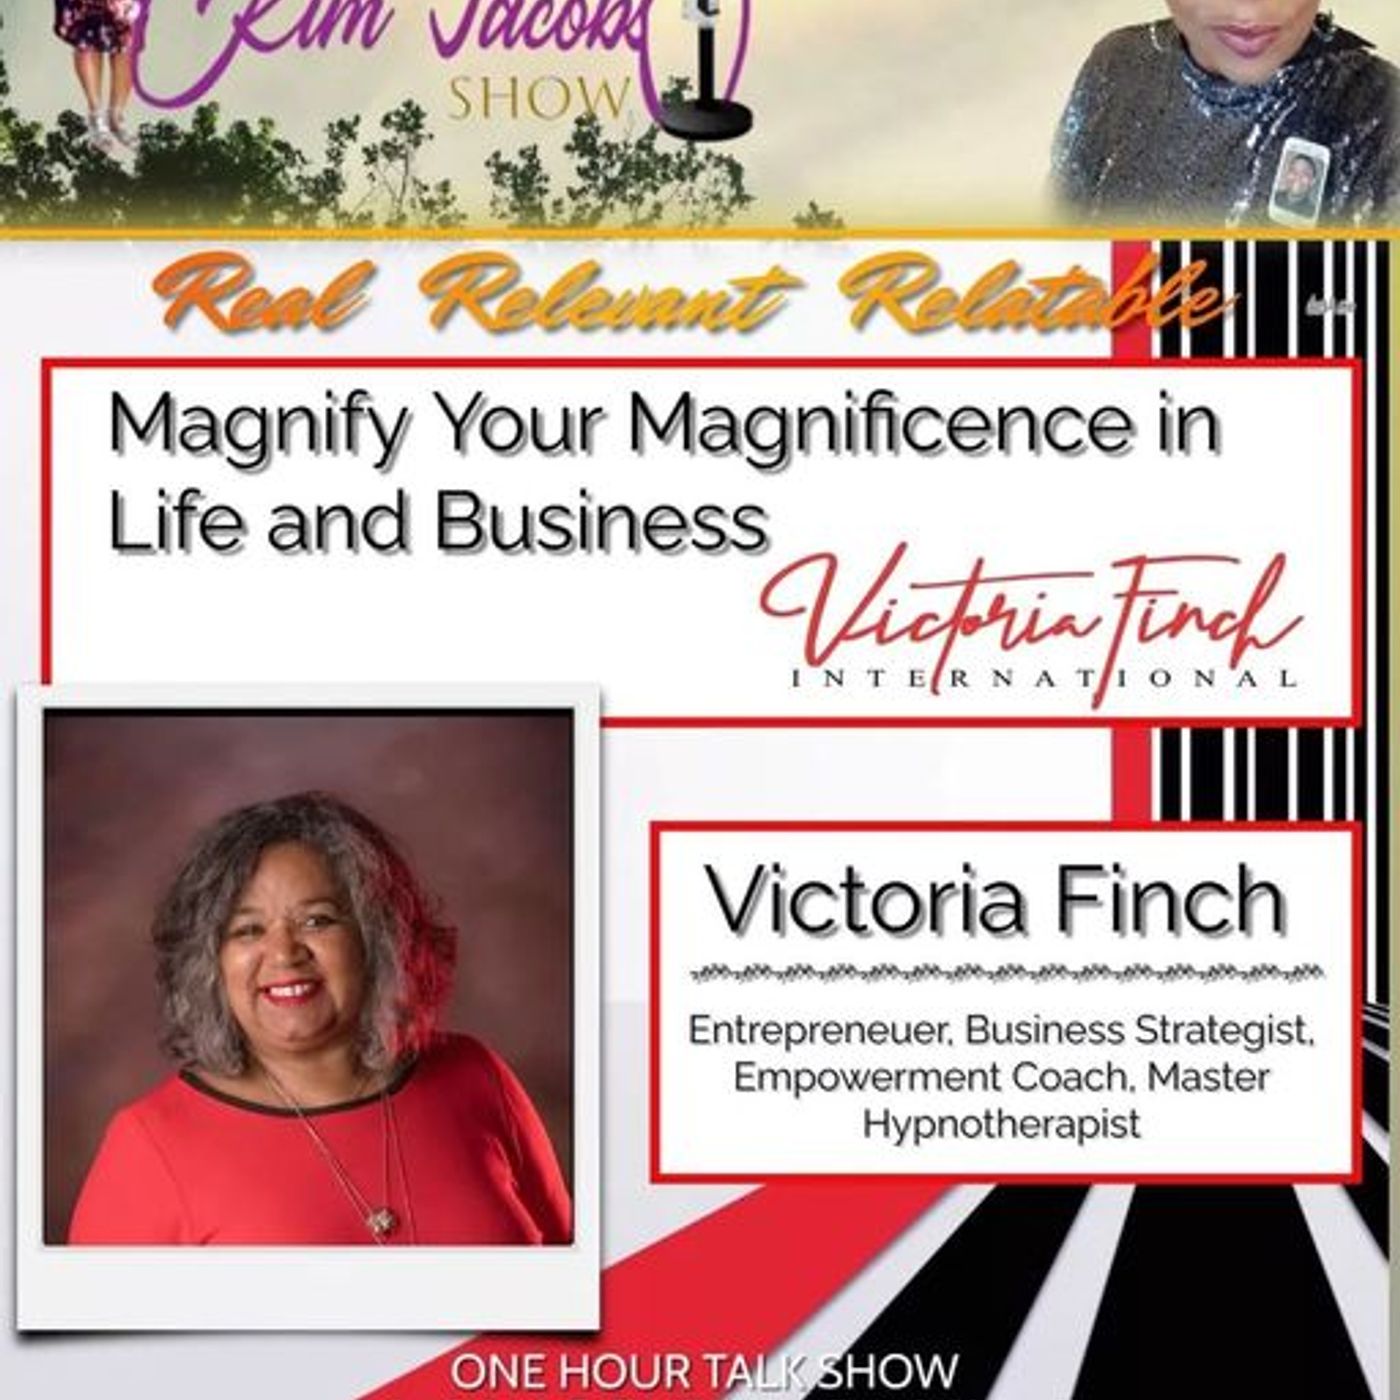 MAGNIFY YOUR MAGNIFICENCE IN LIFE AND BUSINESS